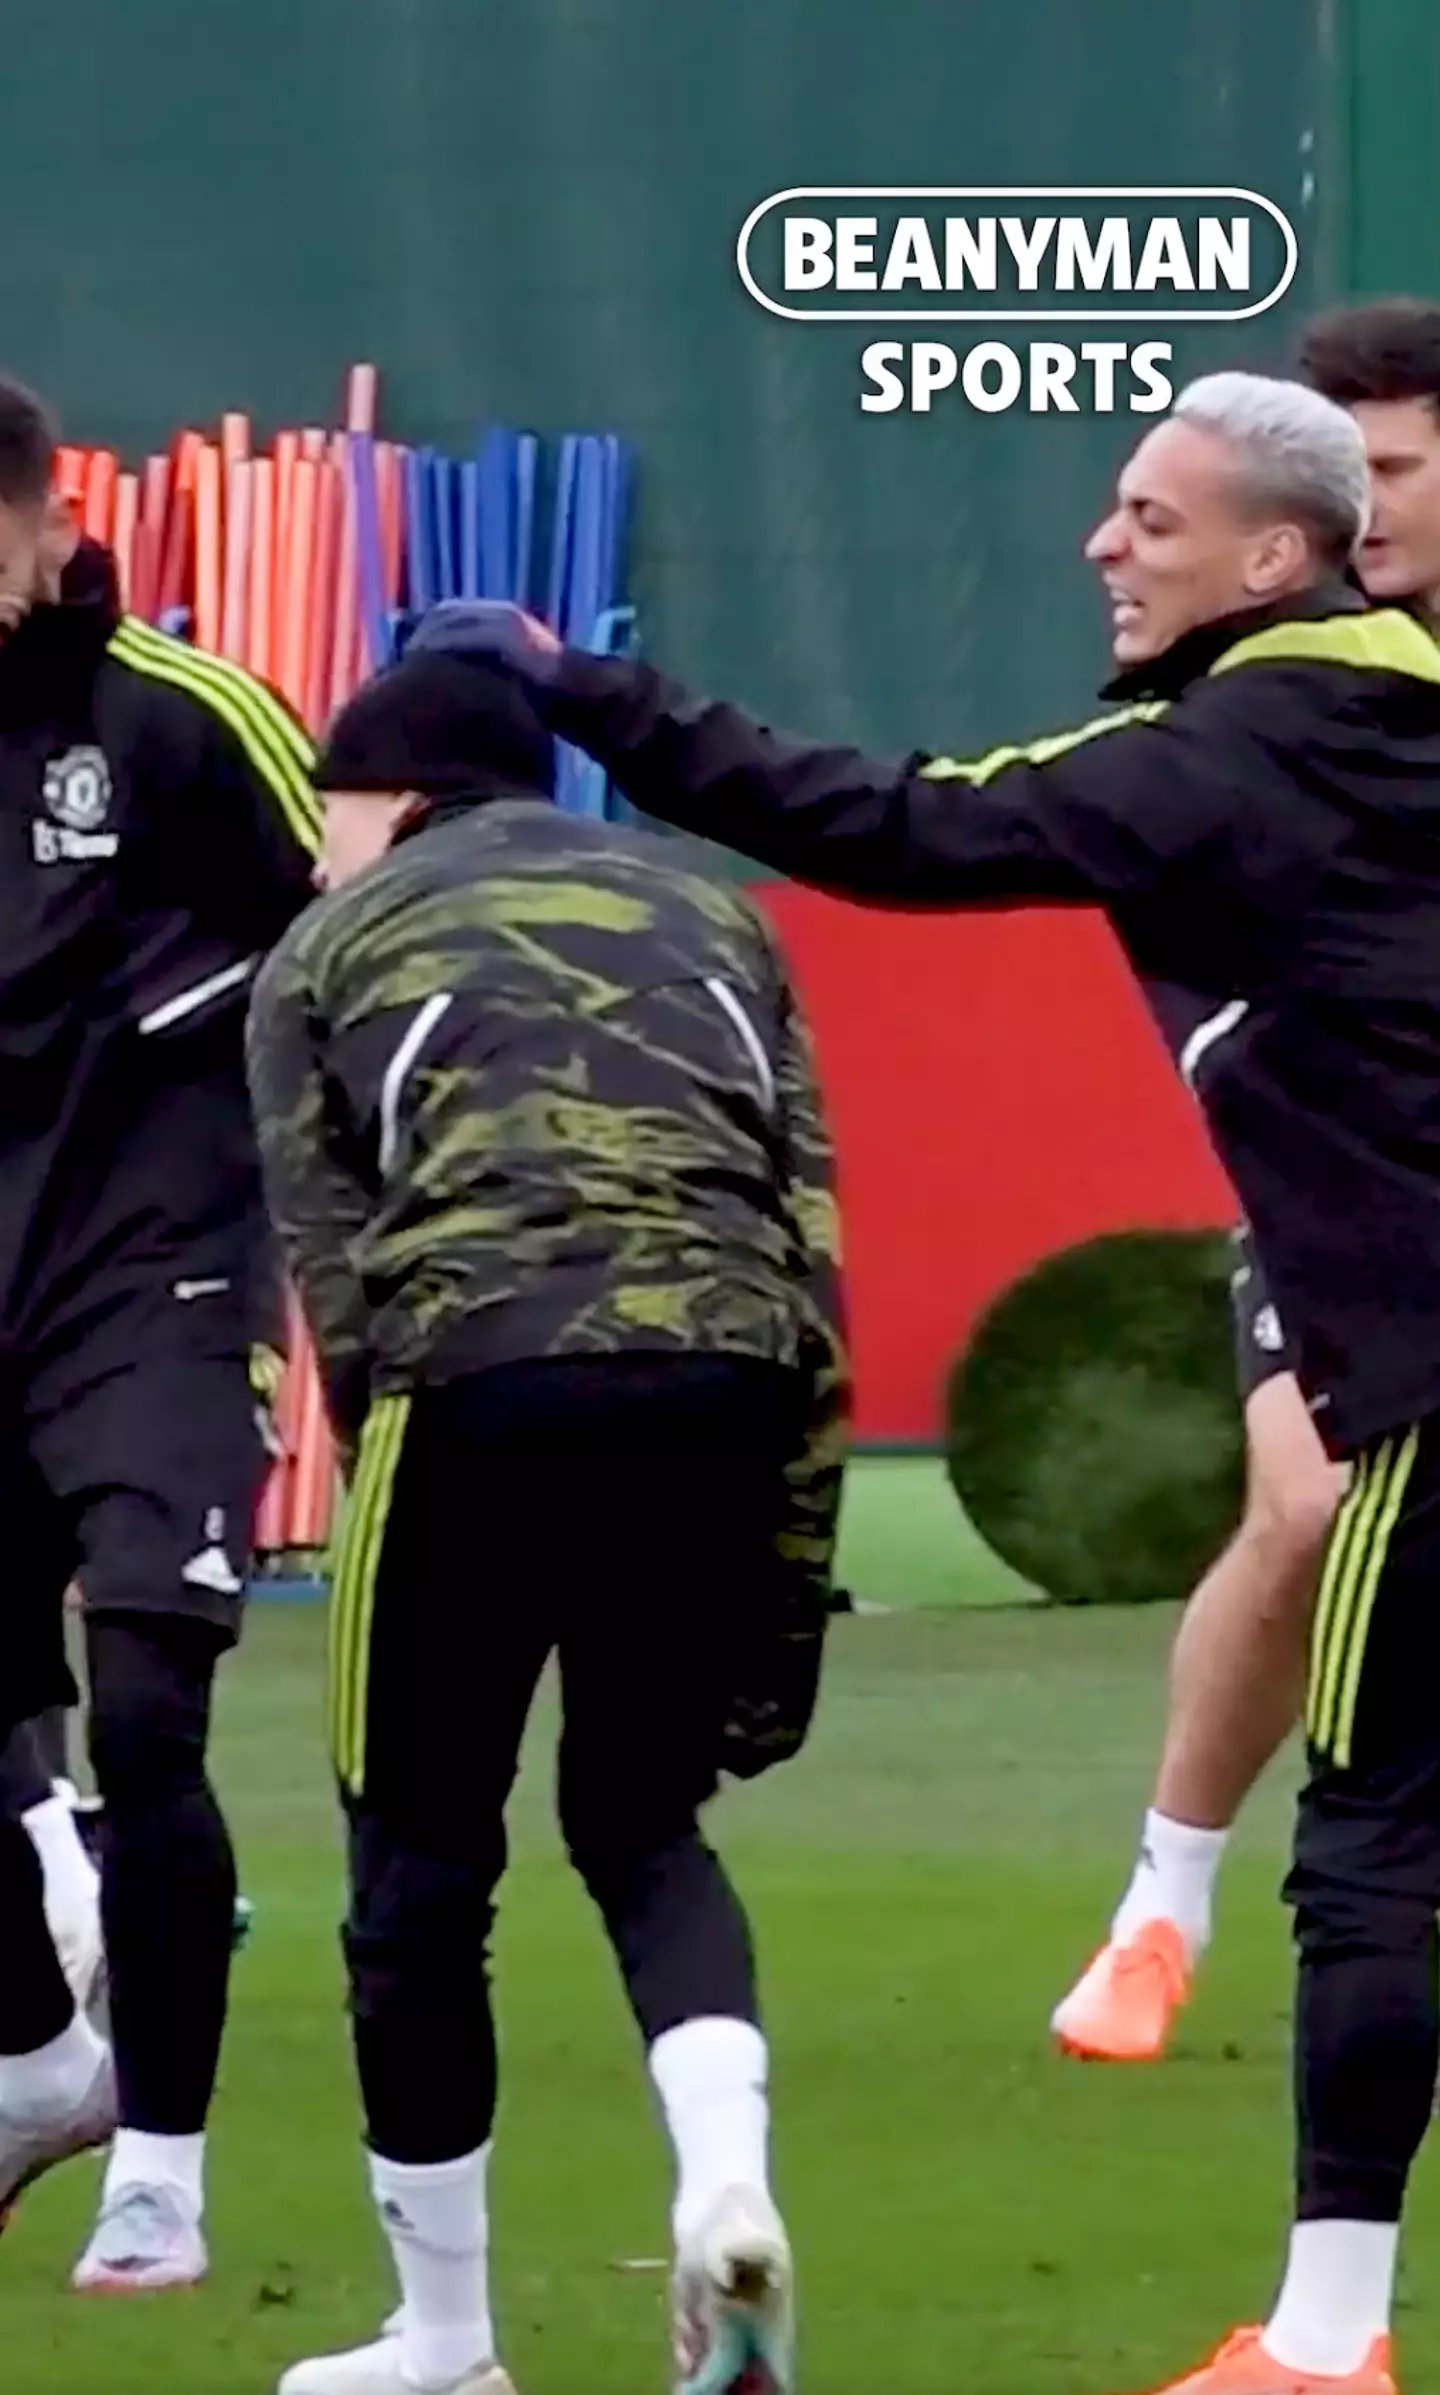 Antony snatched Garnacho's hat, which made the squad laugh. (Image